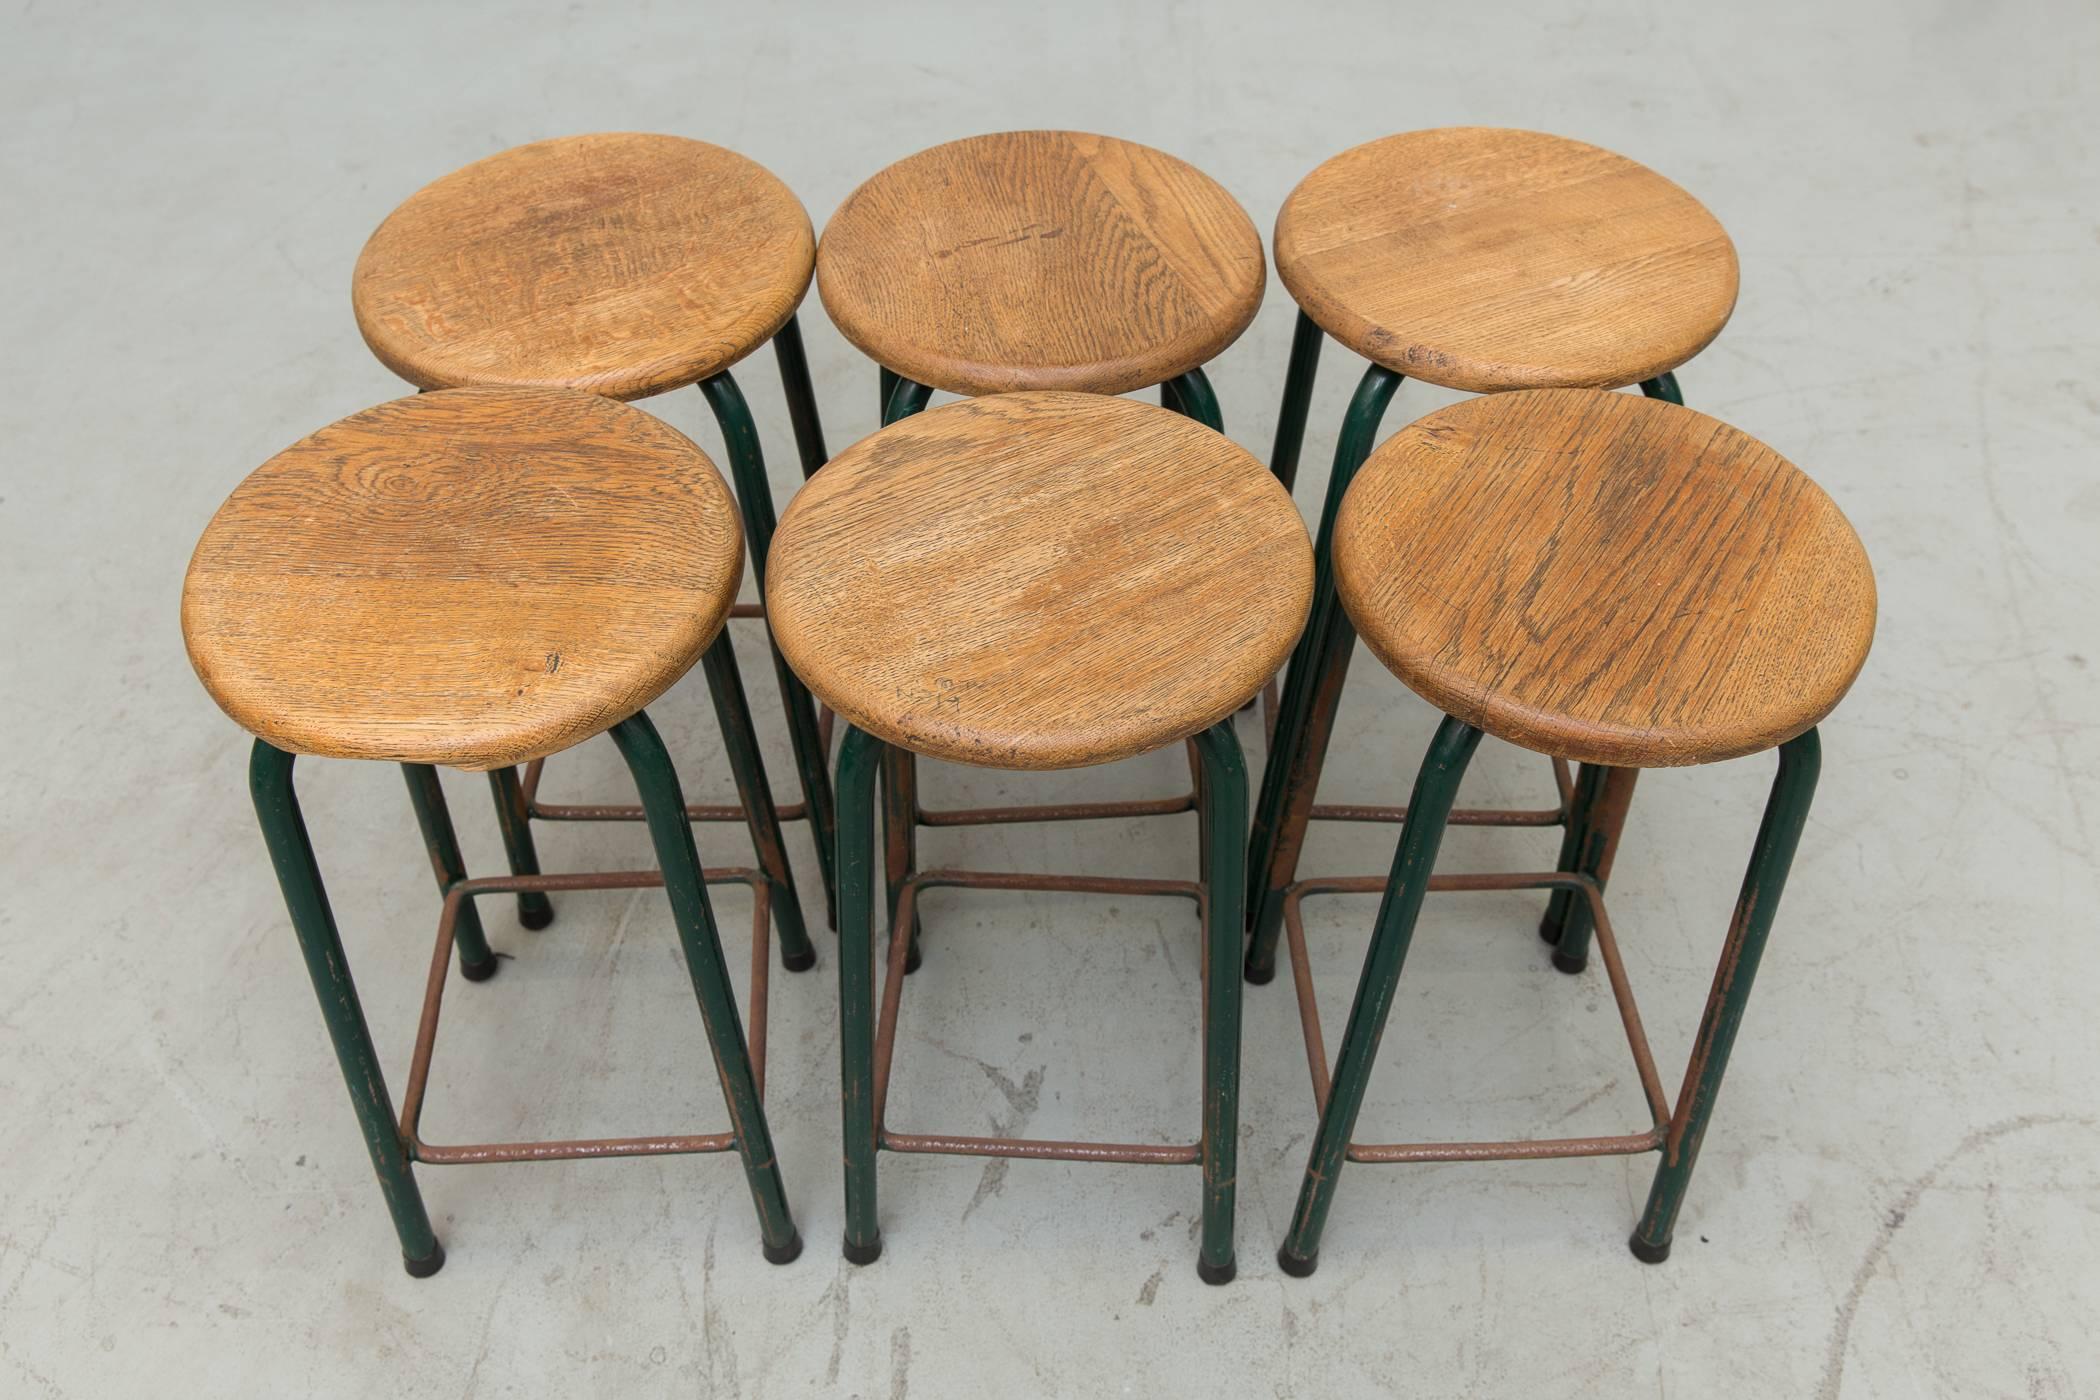 Amazing set of lab stools with solid wood tops and original hunter green enameled metal bases. Original condition, with visible wear and nice patina. Some imperfections in the wood, signs of surface rust. Set price.